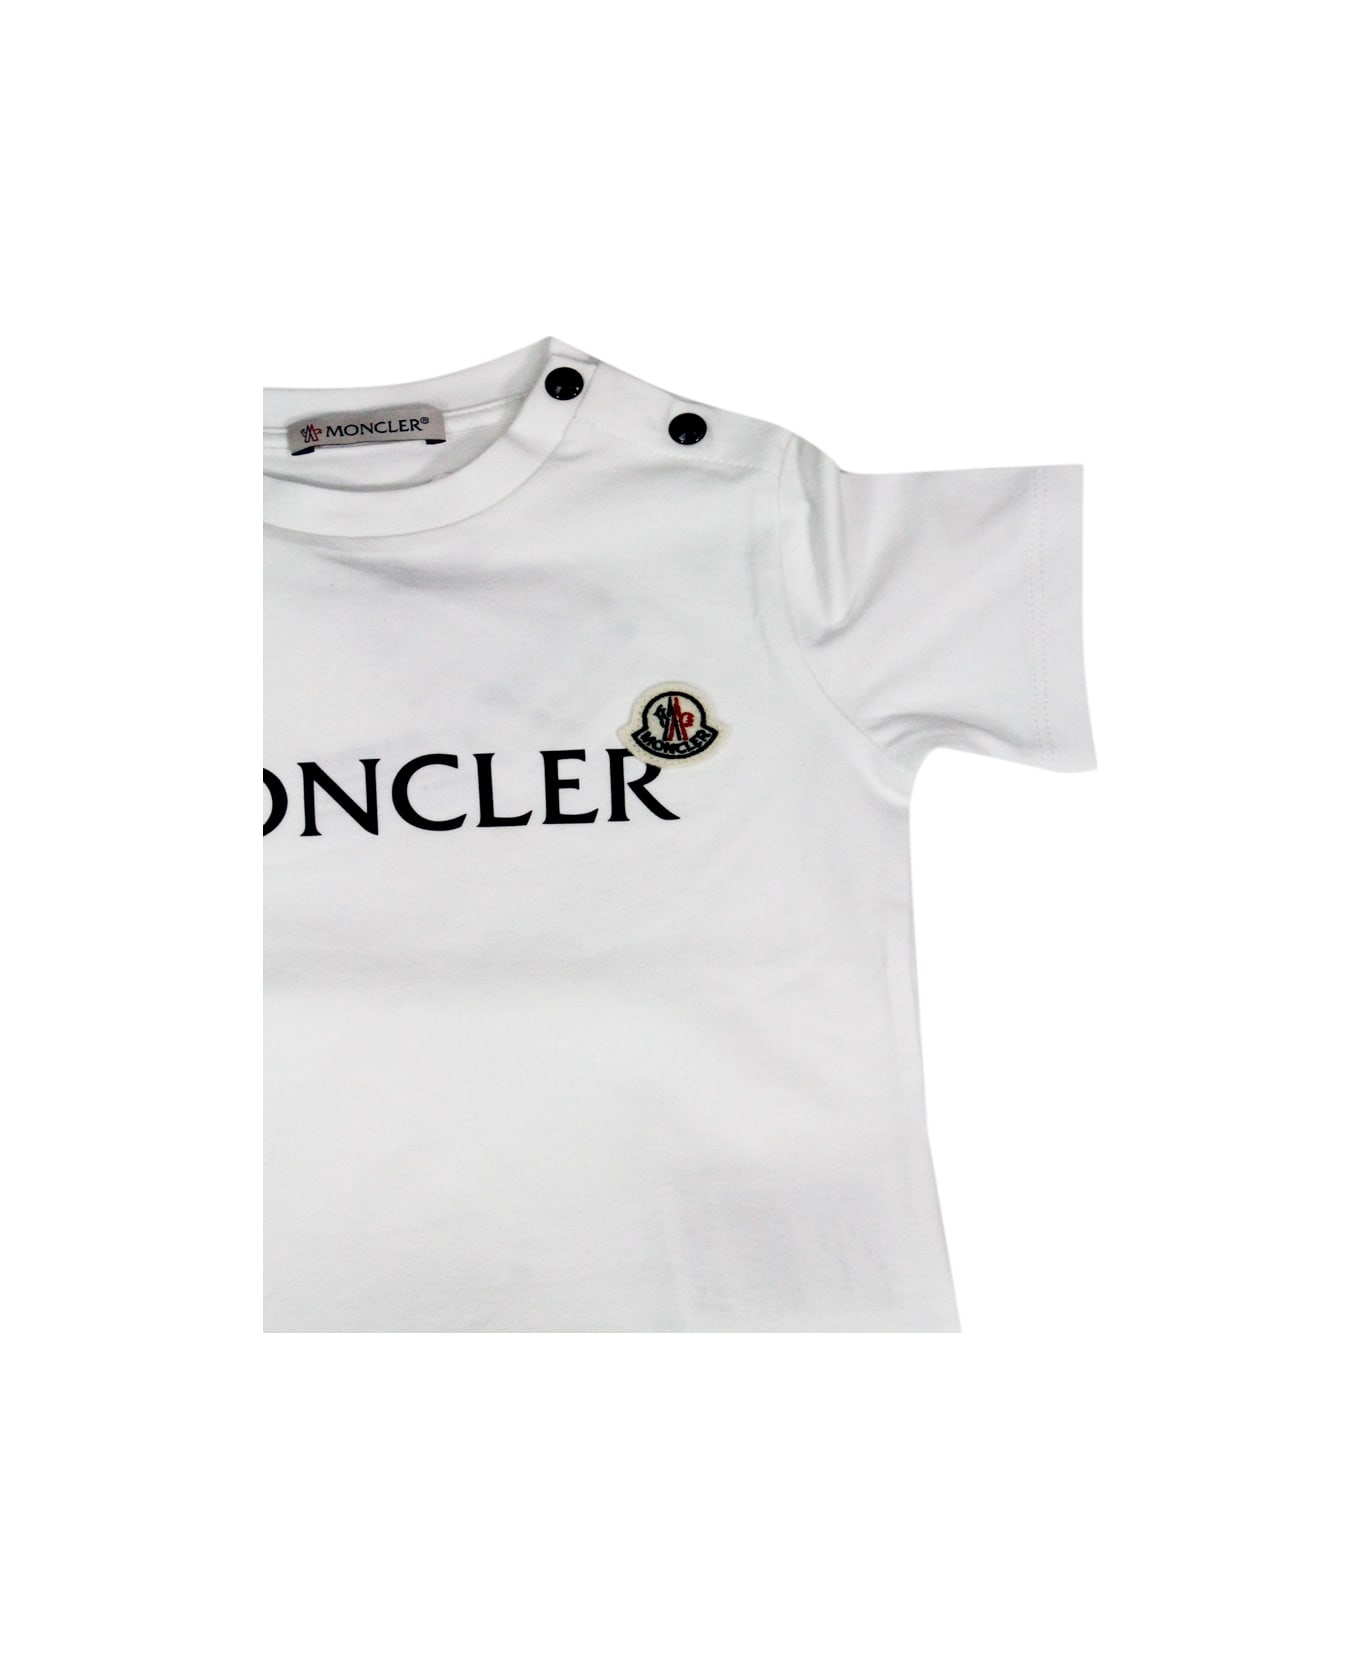 Moncler Complete With Short-sleeved Crew-neck T-shirt And Shorts With Elasticated Waist And Side Pockets. Logo On The Chest - White - Blu ジャンプスーツ